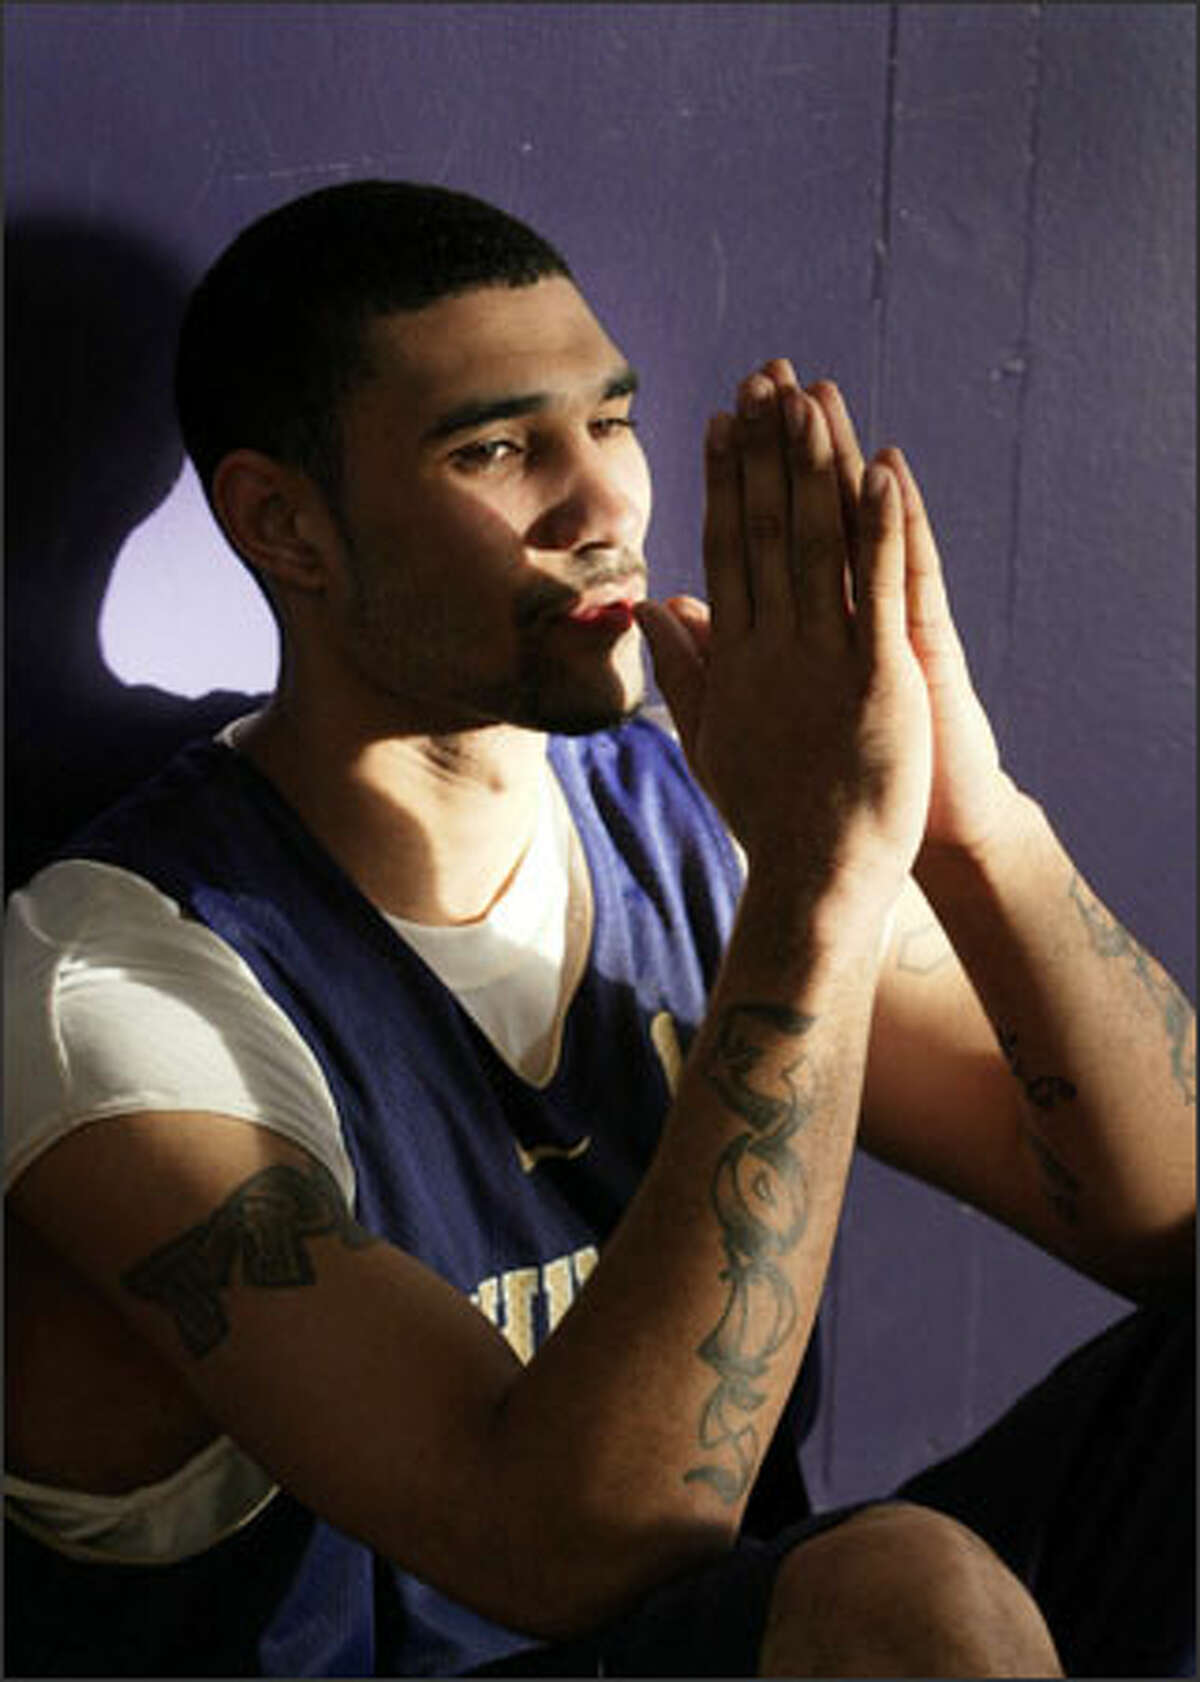 Washington guard Tre Simmons has "God's Gift" tattooed on the outside of his forearms, meaning he is a gift from God.